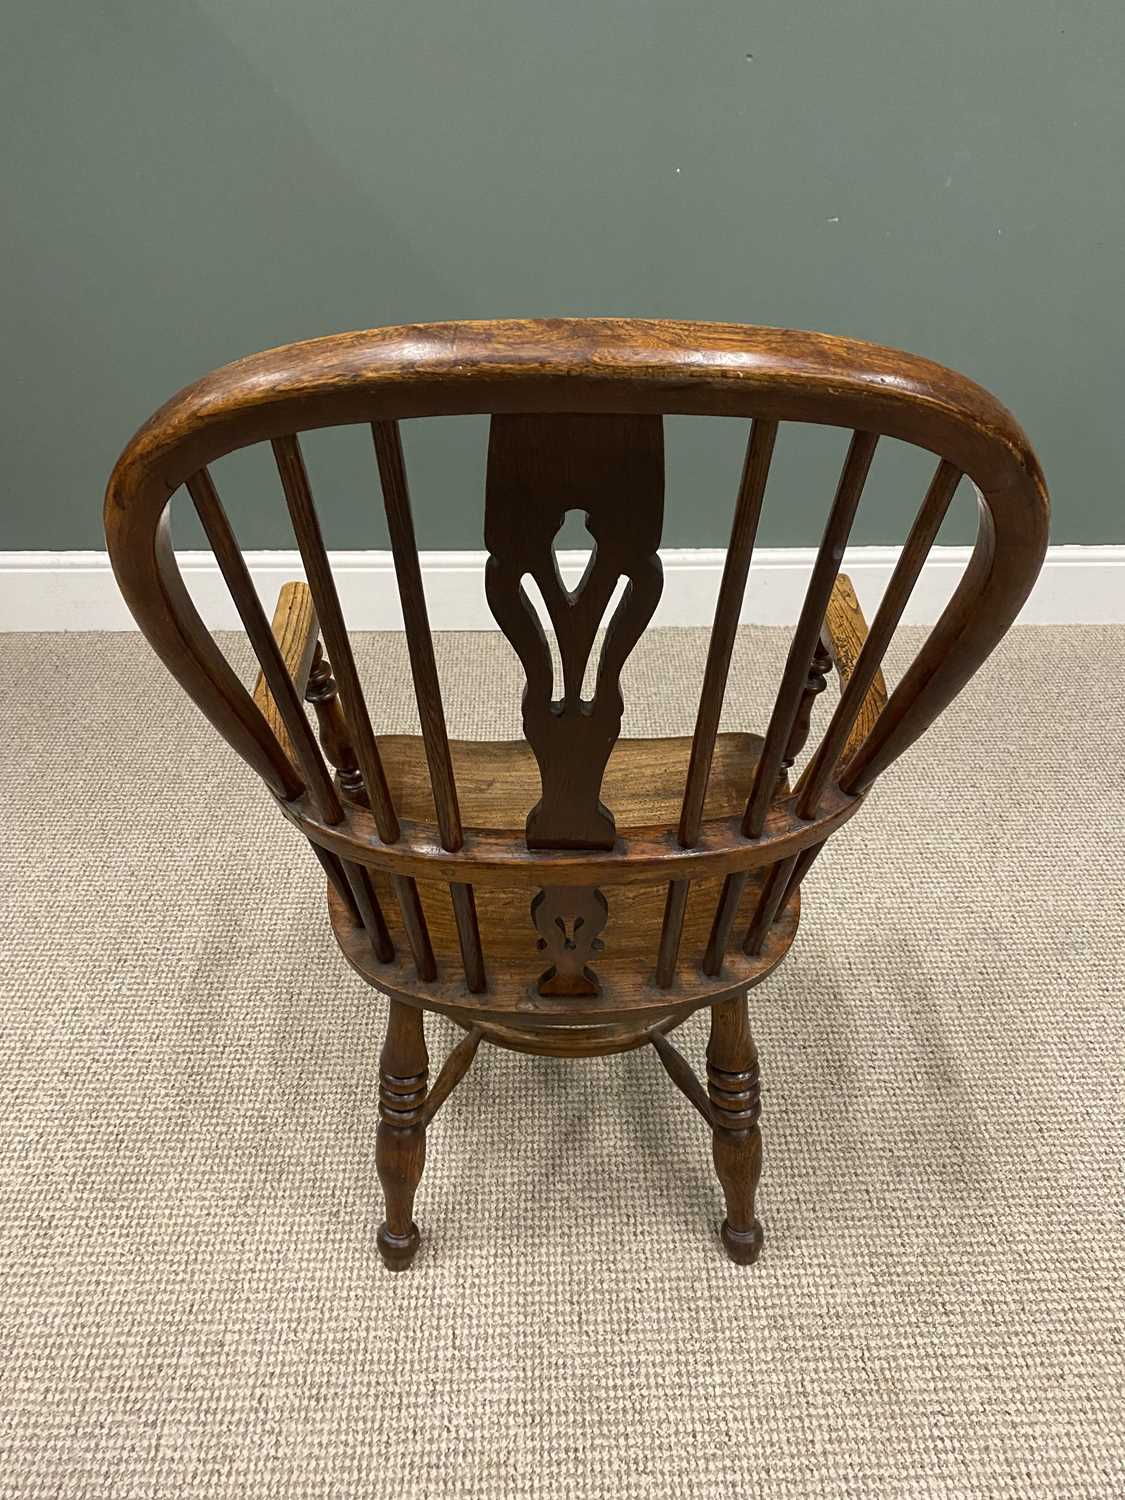 ANTIQUE OAK & ELM WINDSOR ARMCHAIR with crinoline stretcher, late 19th Century, having a high hoop - Image 3 of 3